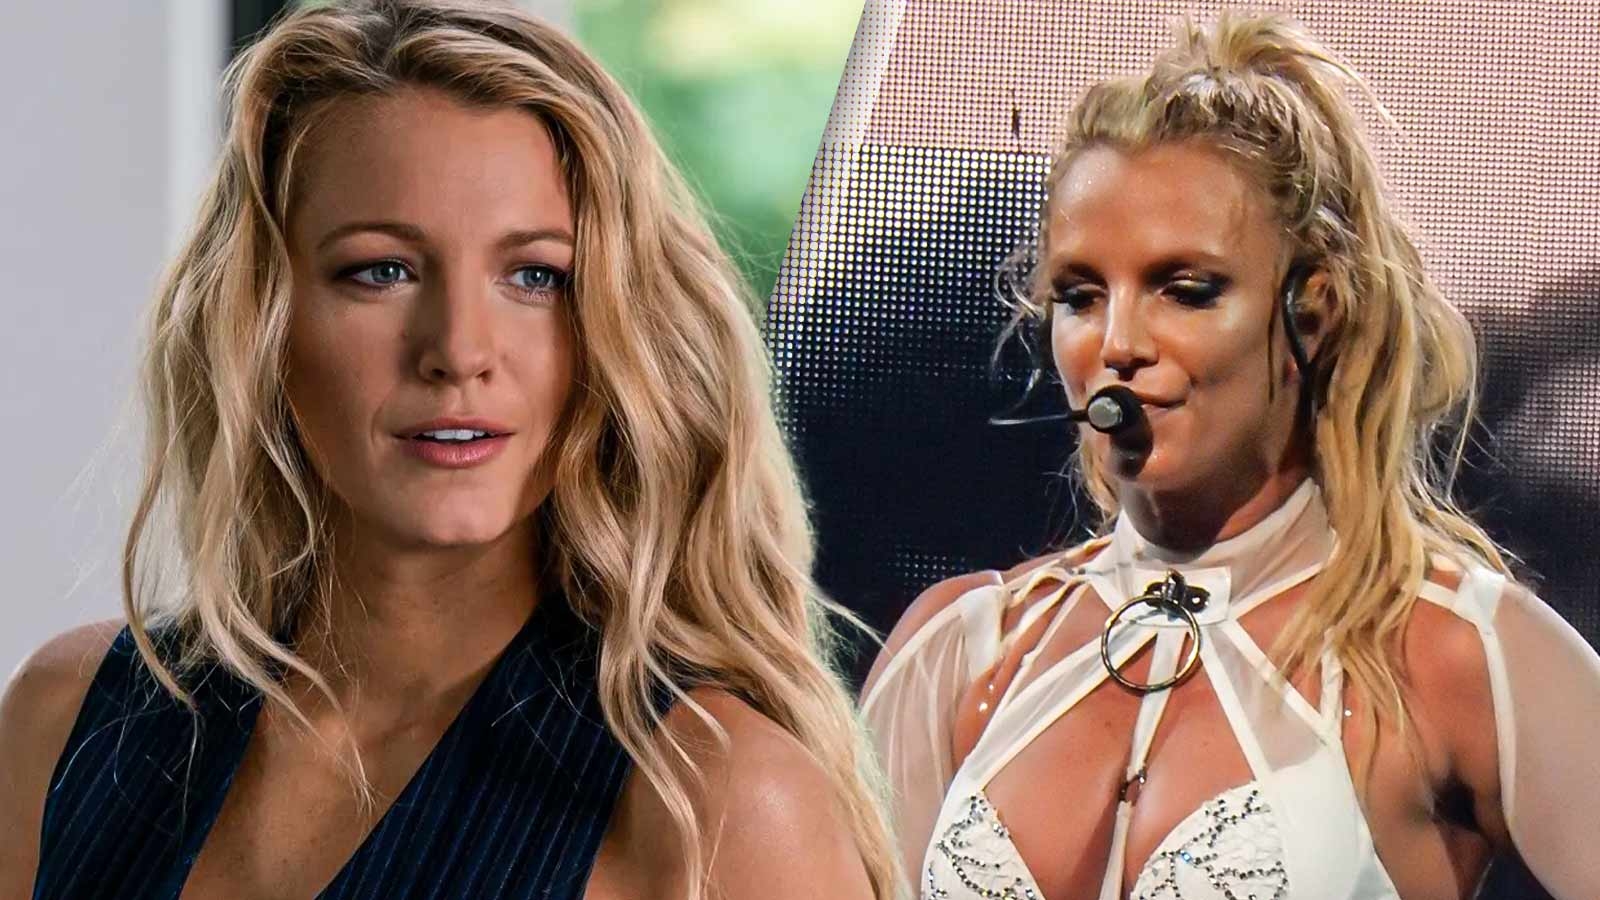 “It’s Britney b**ch”: Blake Lively Resurrects Britney Spears’ Iconic Early 2000s Era Look at an Event for Her Latest Film ‘It Ends With Us’